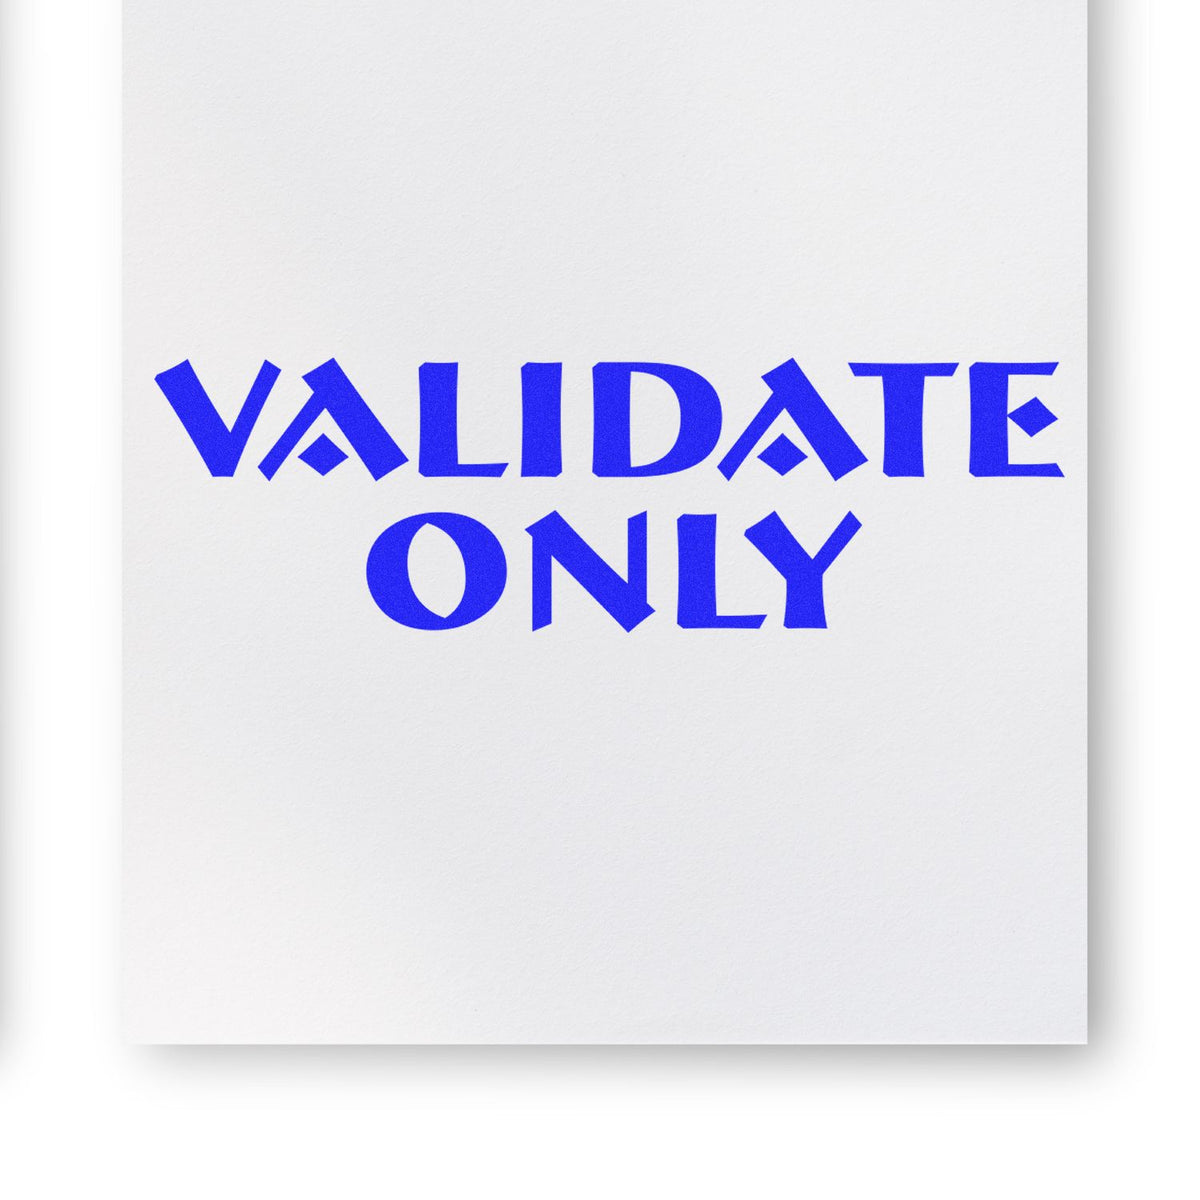 Large Validate Only Rubber Stamp In Use Photo